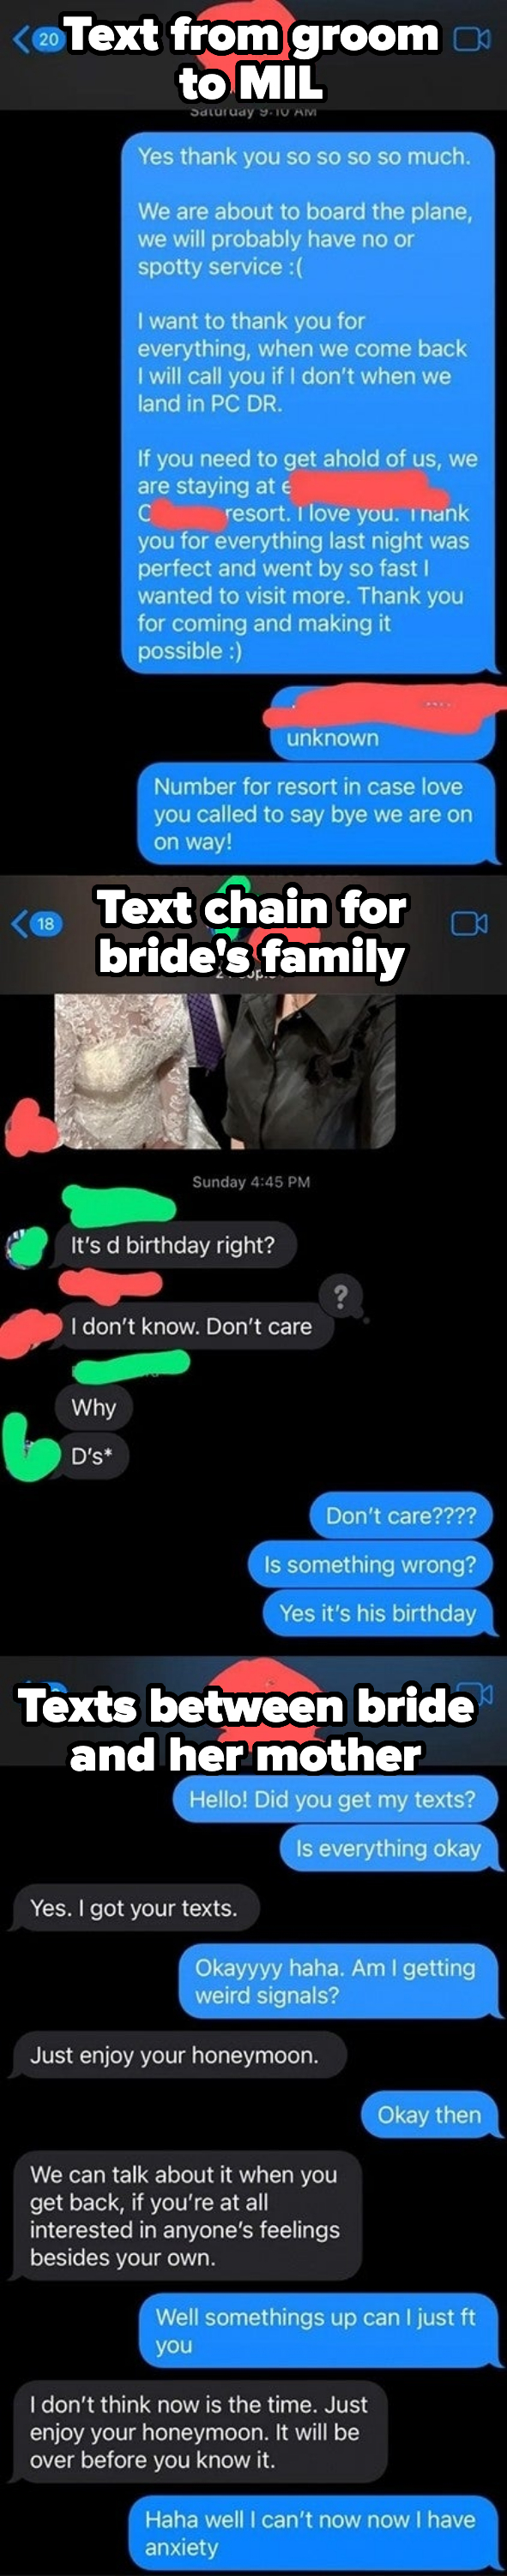 Chat screen with texts discussing a surprise birthday plan and one person unsure of the date